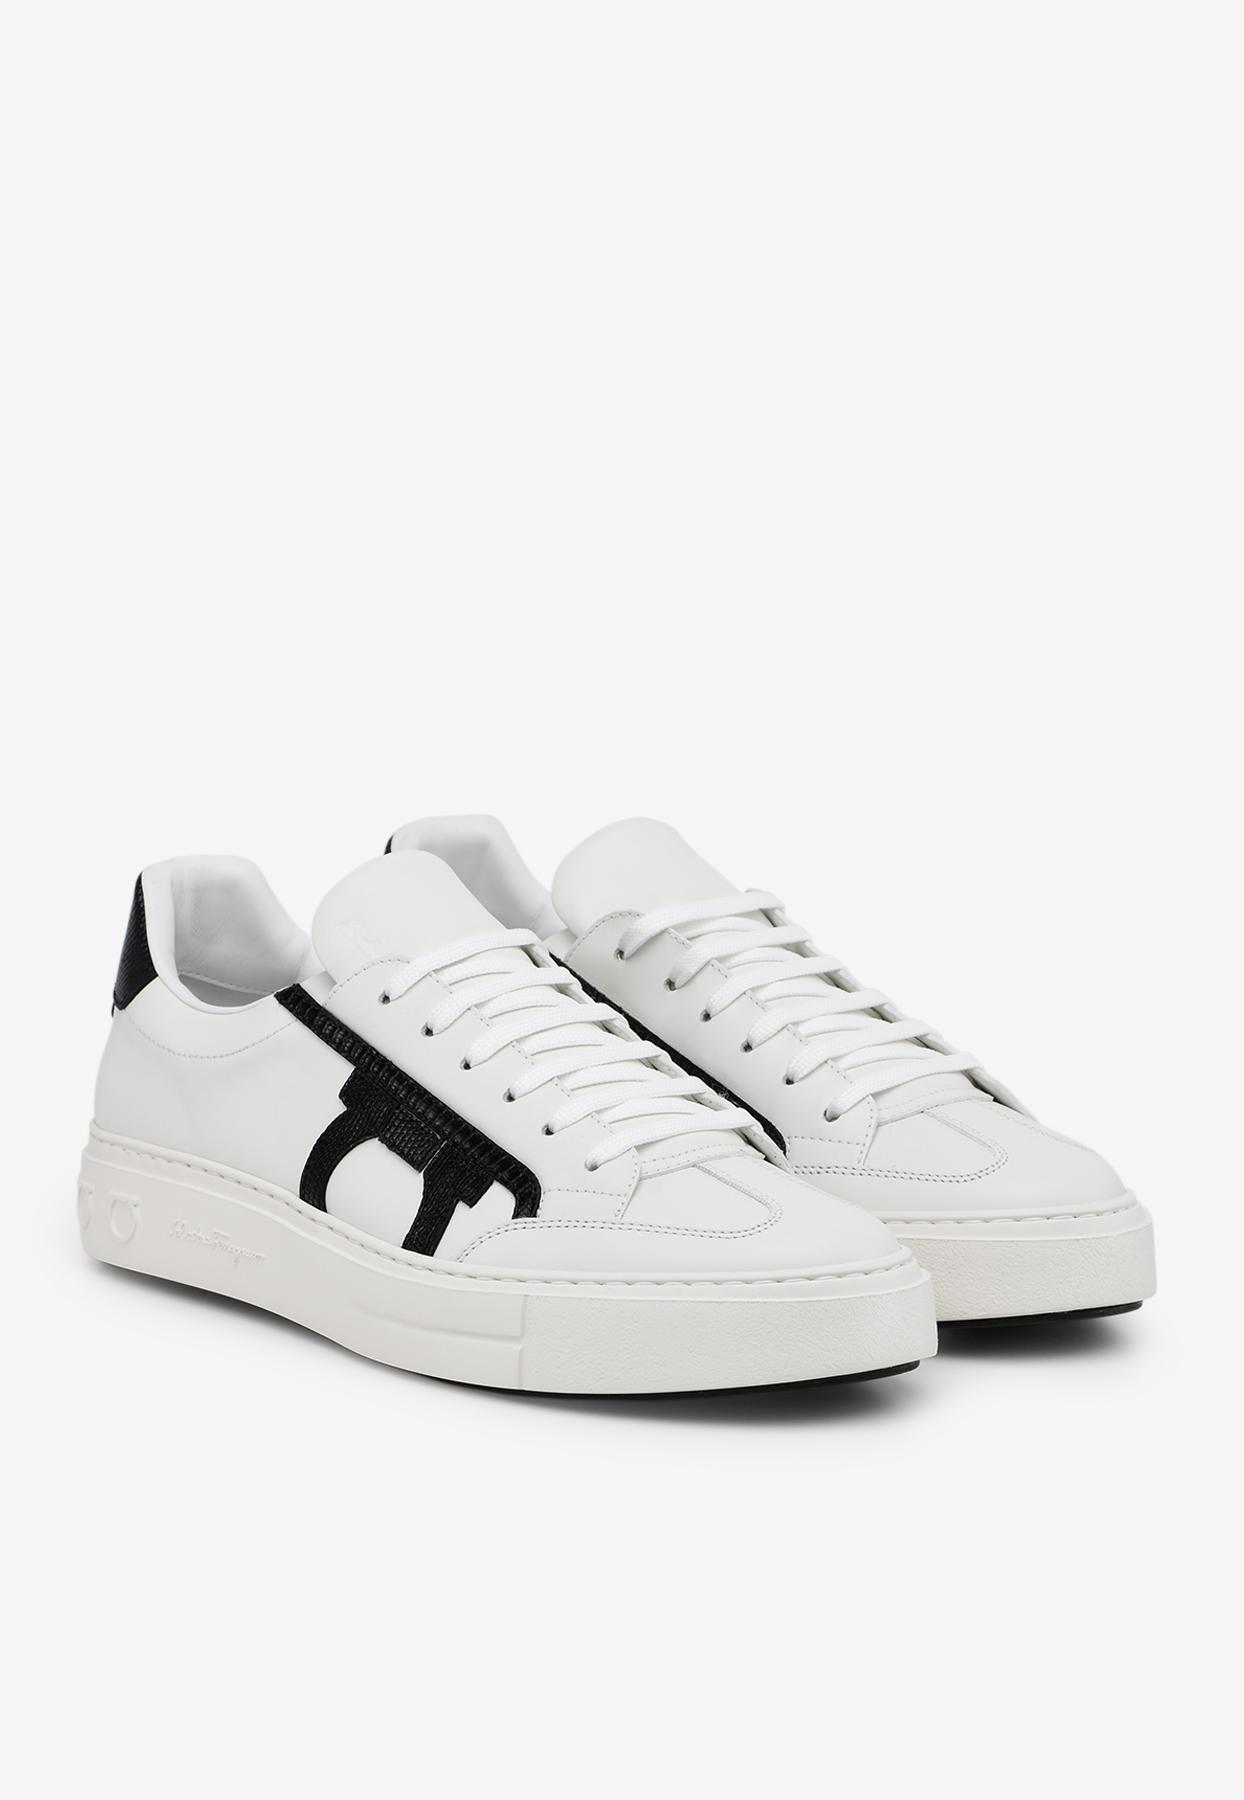 Ferragamo Leather Low Top Sneakers in White for Men - Save 36% - Lyst